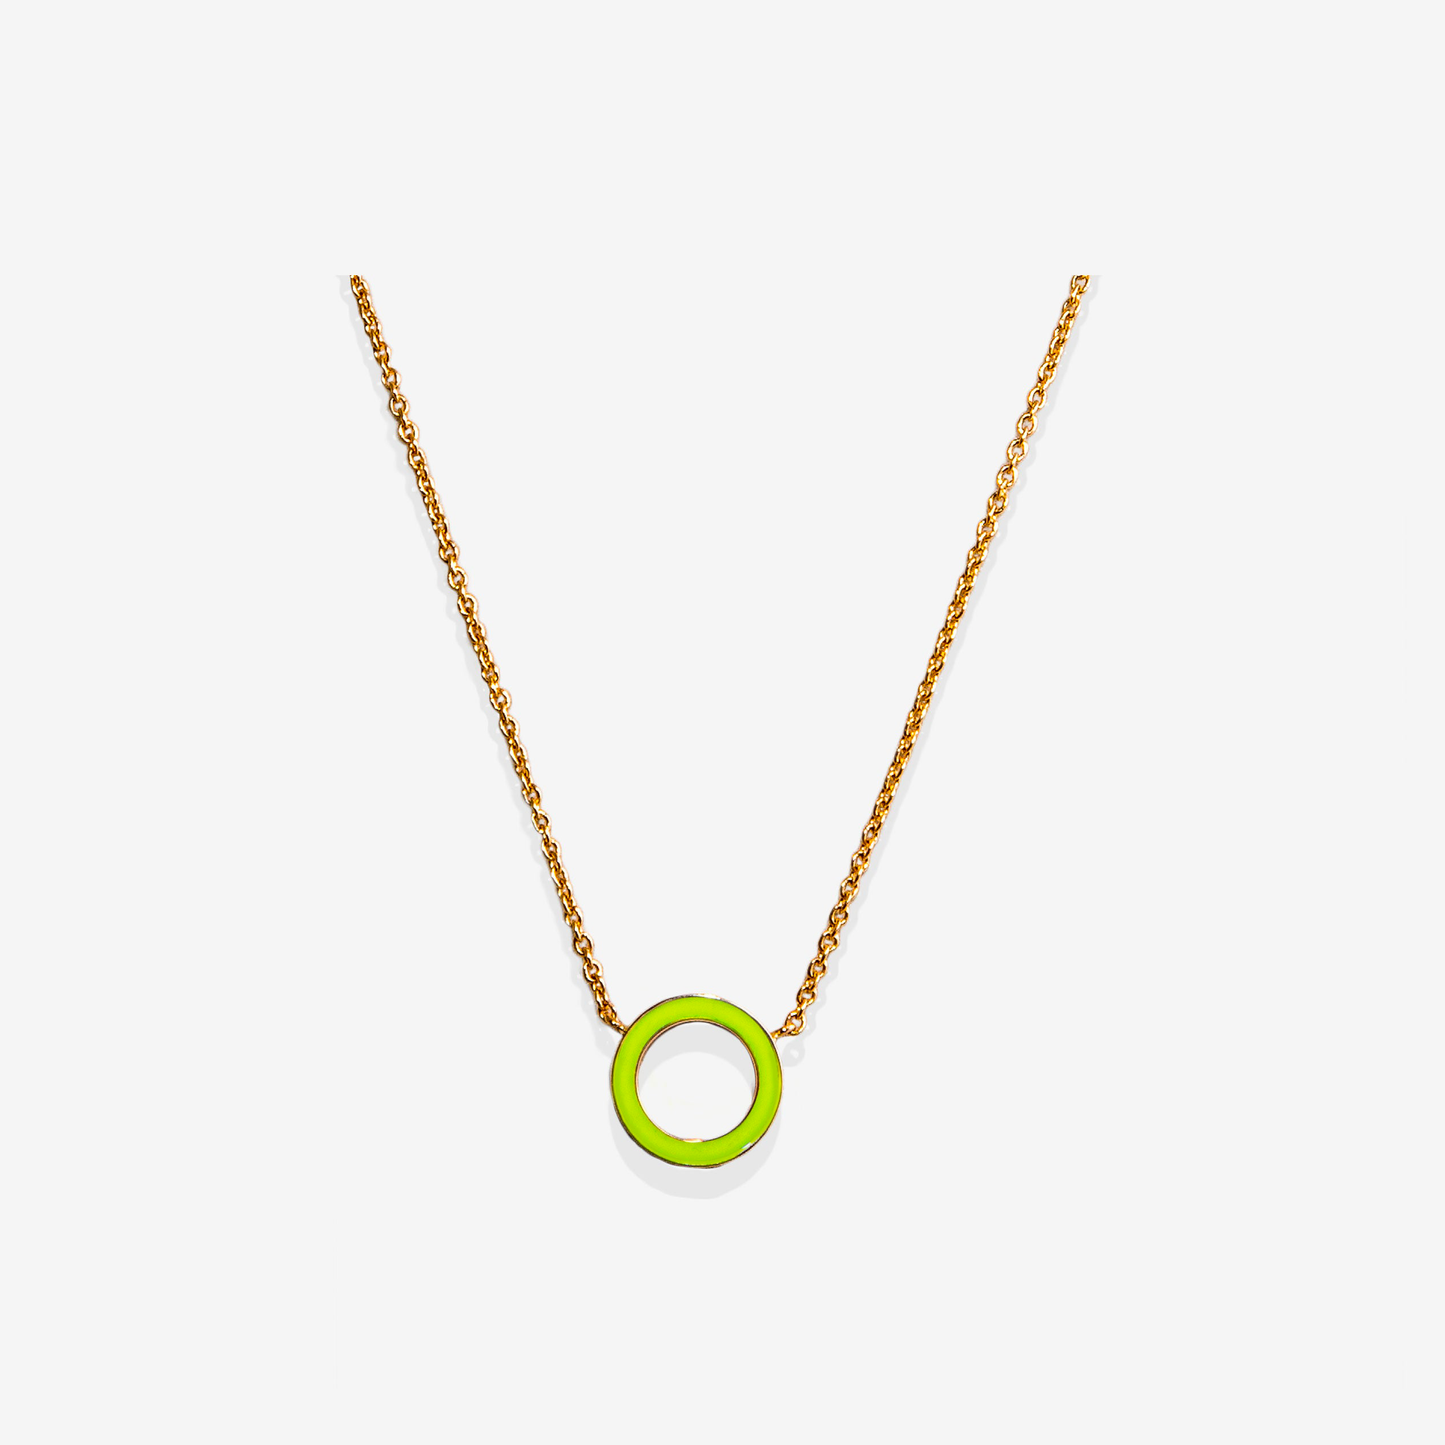 Inside fluo yellow necklace